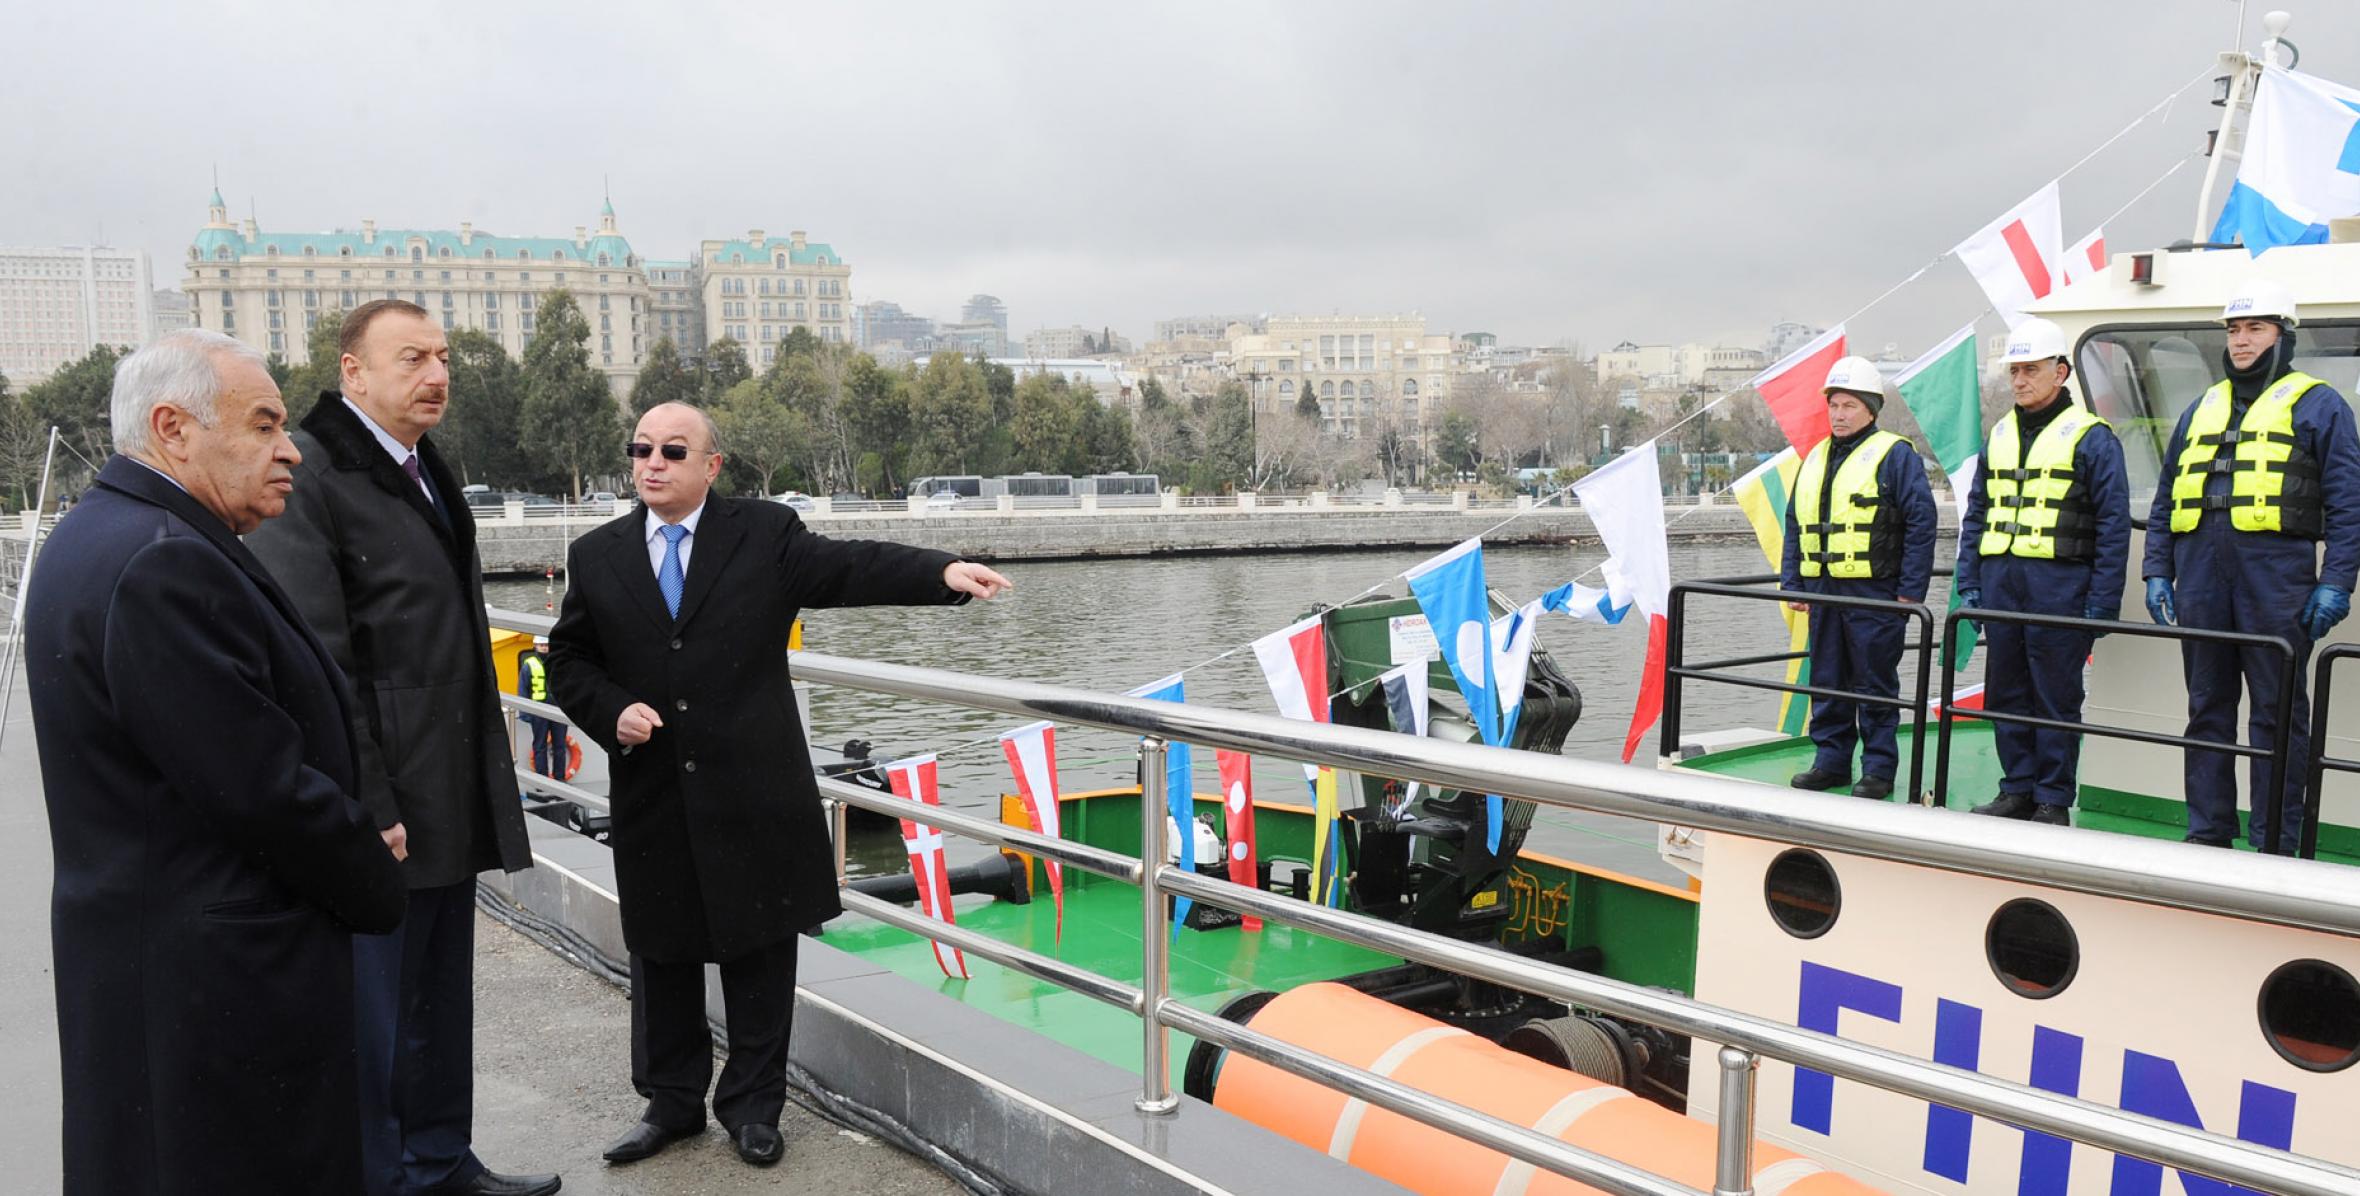 Ilham Aliyev reviewed suction dredgers, tugs, supply vessels and a research boat brought by the Ministry of Emergency Situations